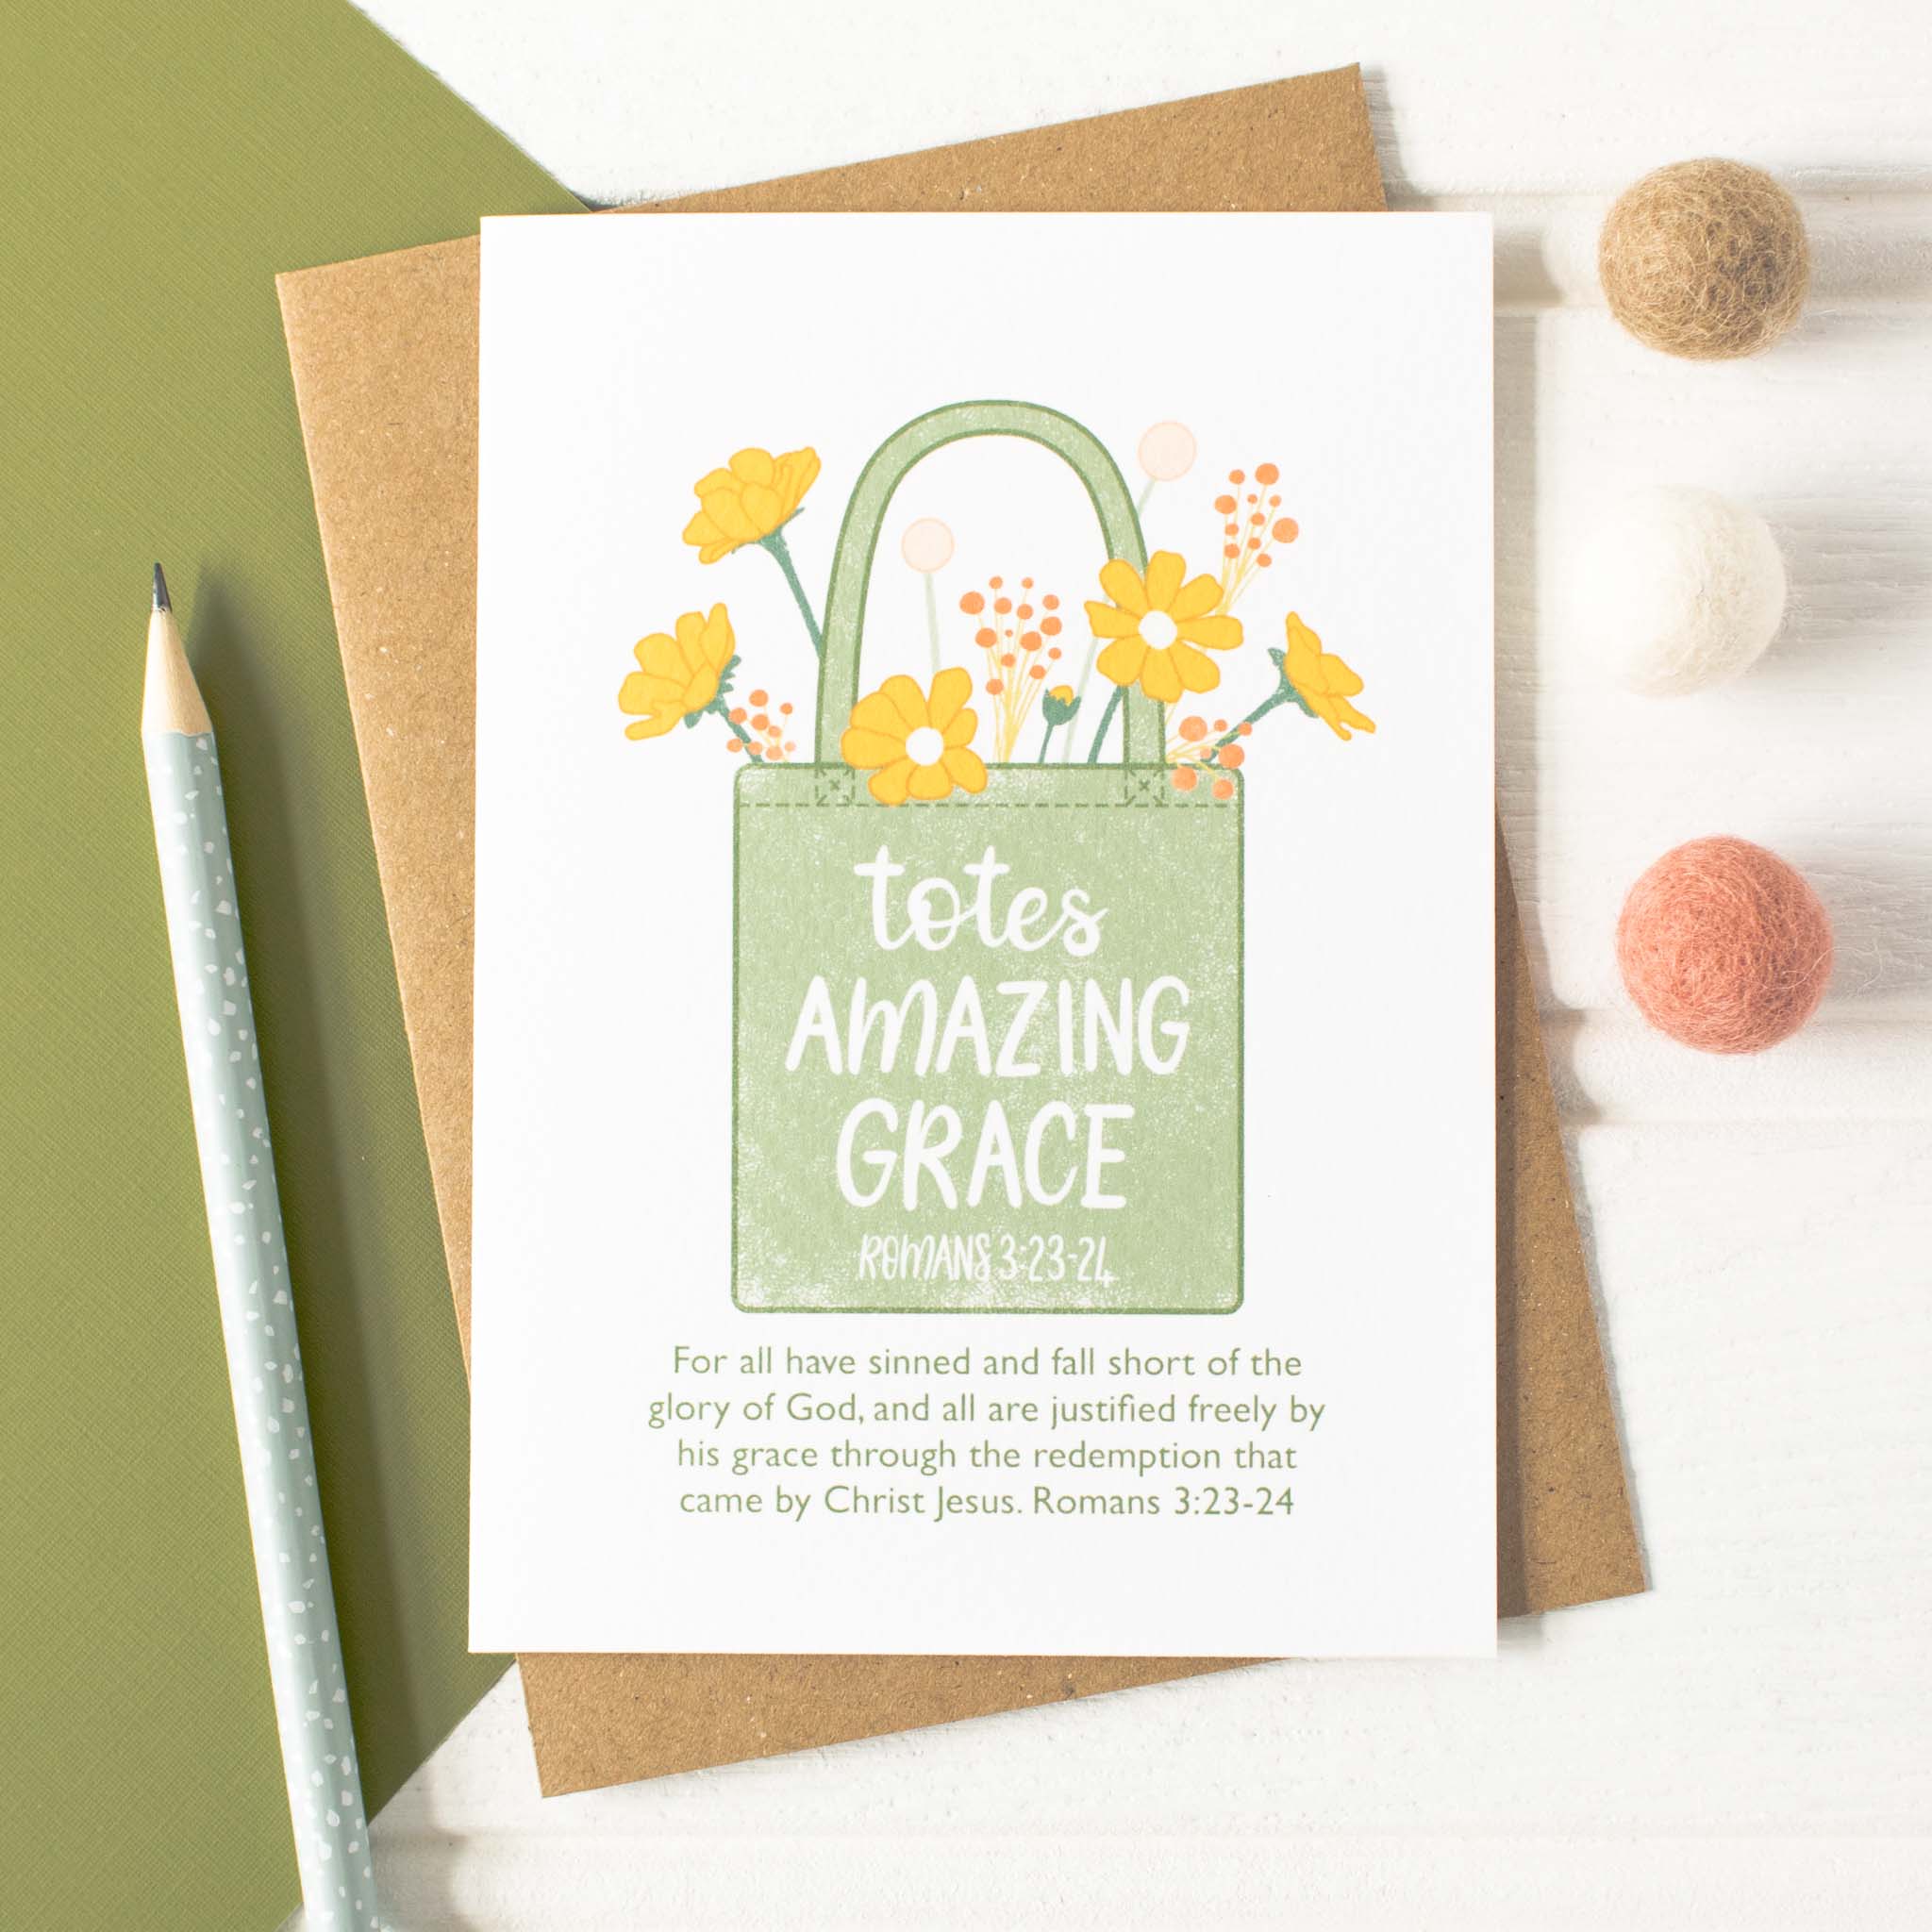 Totes Amazing Grace Card with kraft envelope